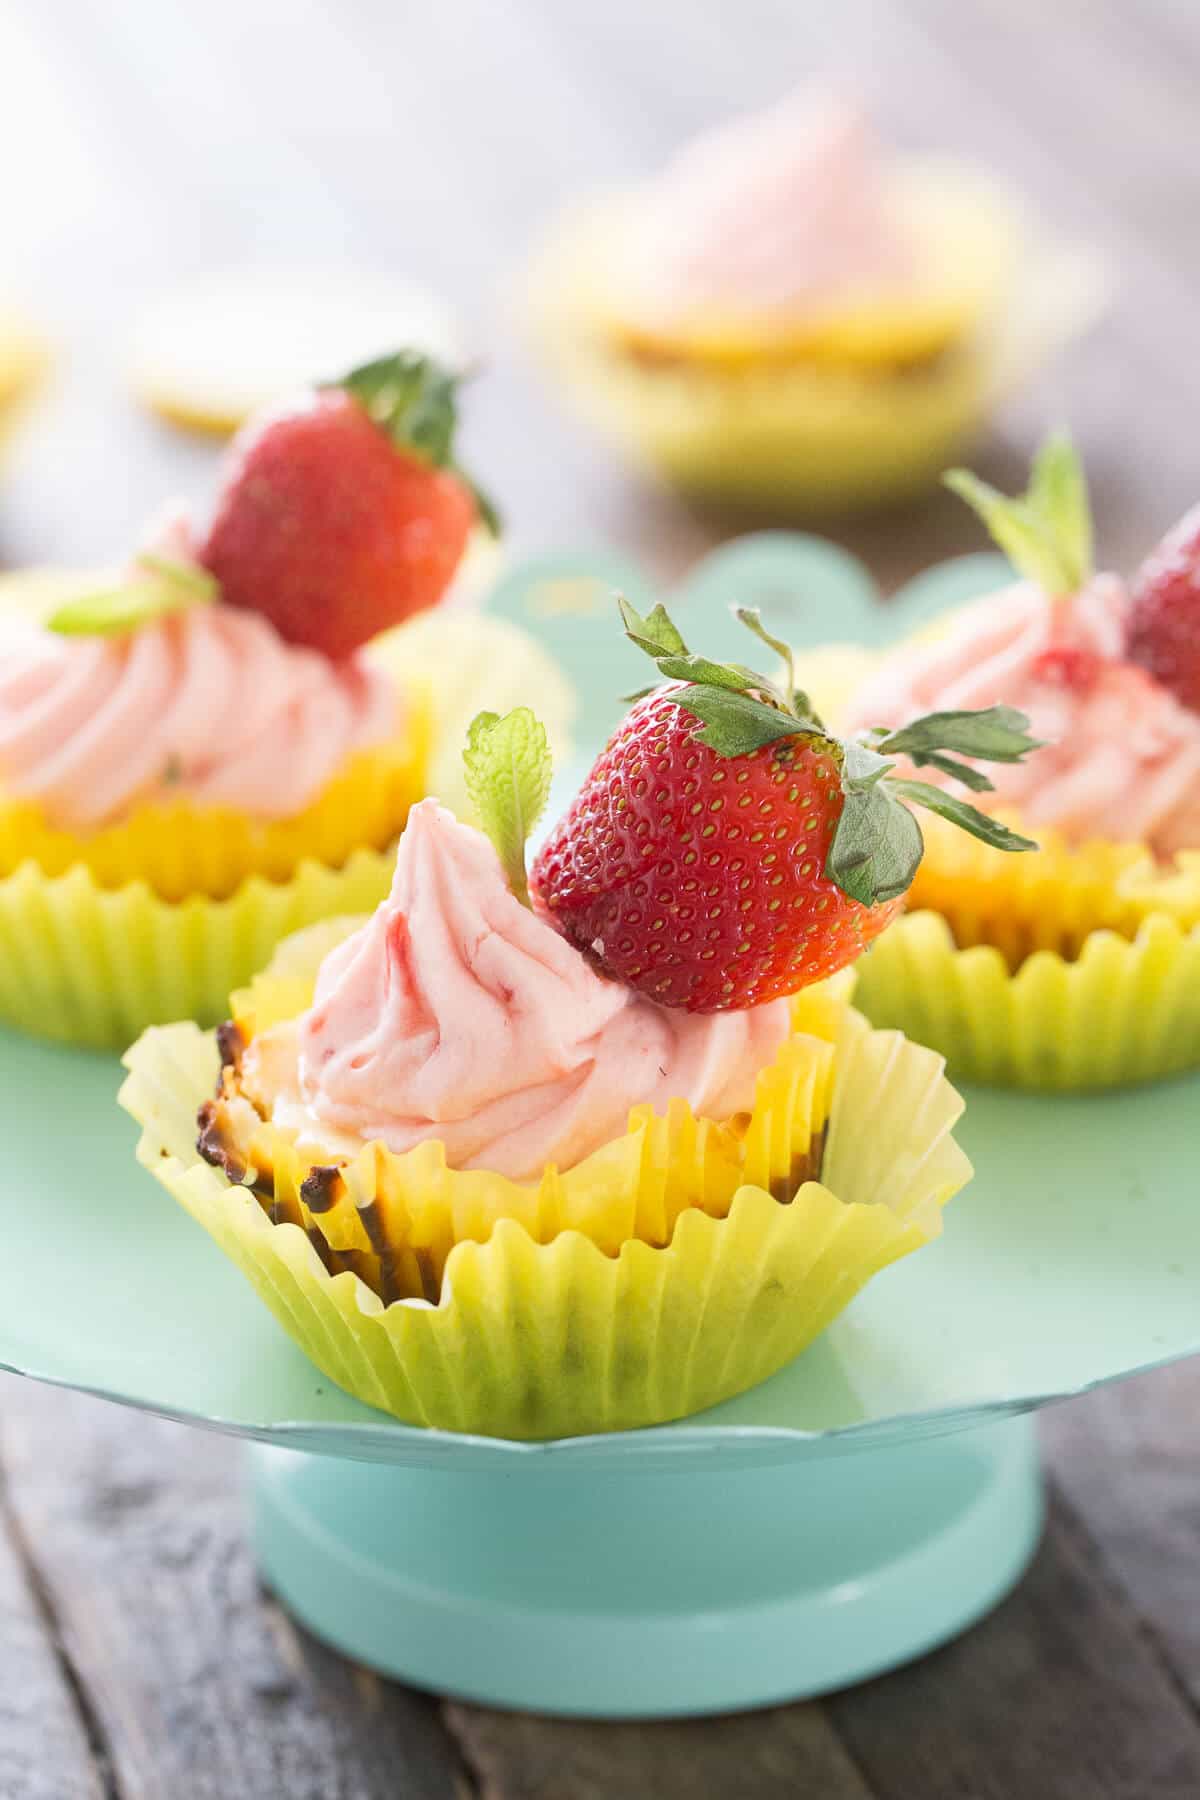 Strawberry lemonade will make you pucker all while satisfying your sweet tooth!